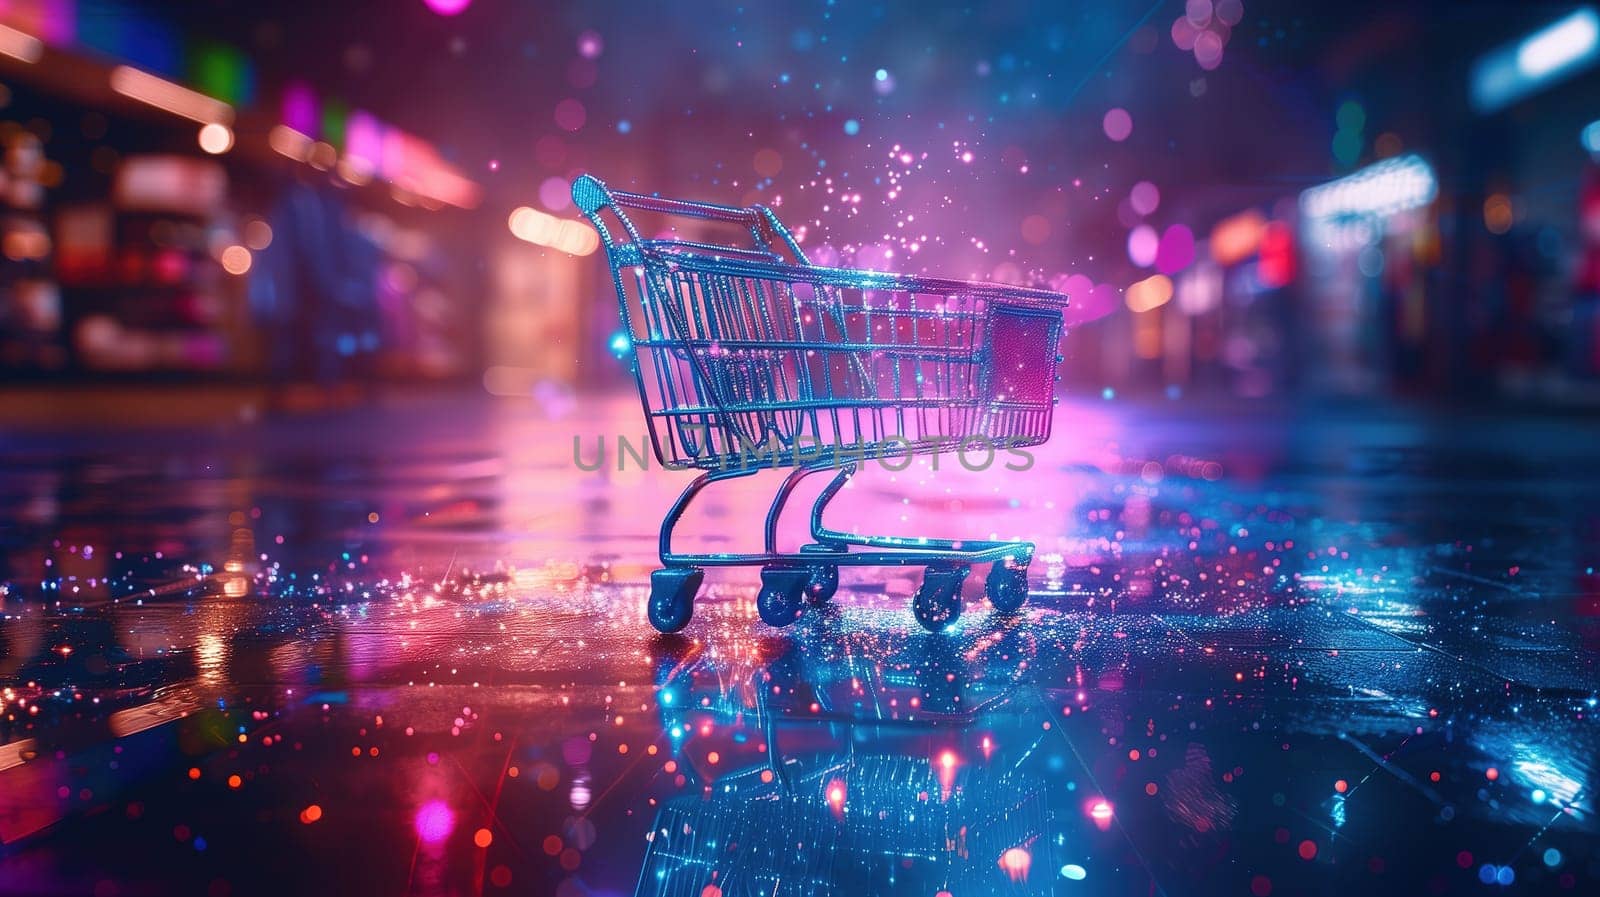 A shopping cart, typically used for carrying items during shopping, is left unattended on the wet ground during rainy weather.